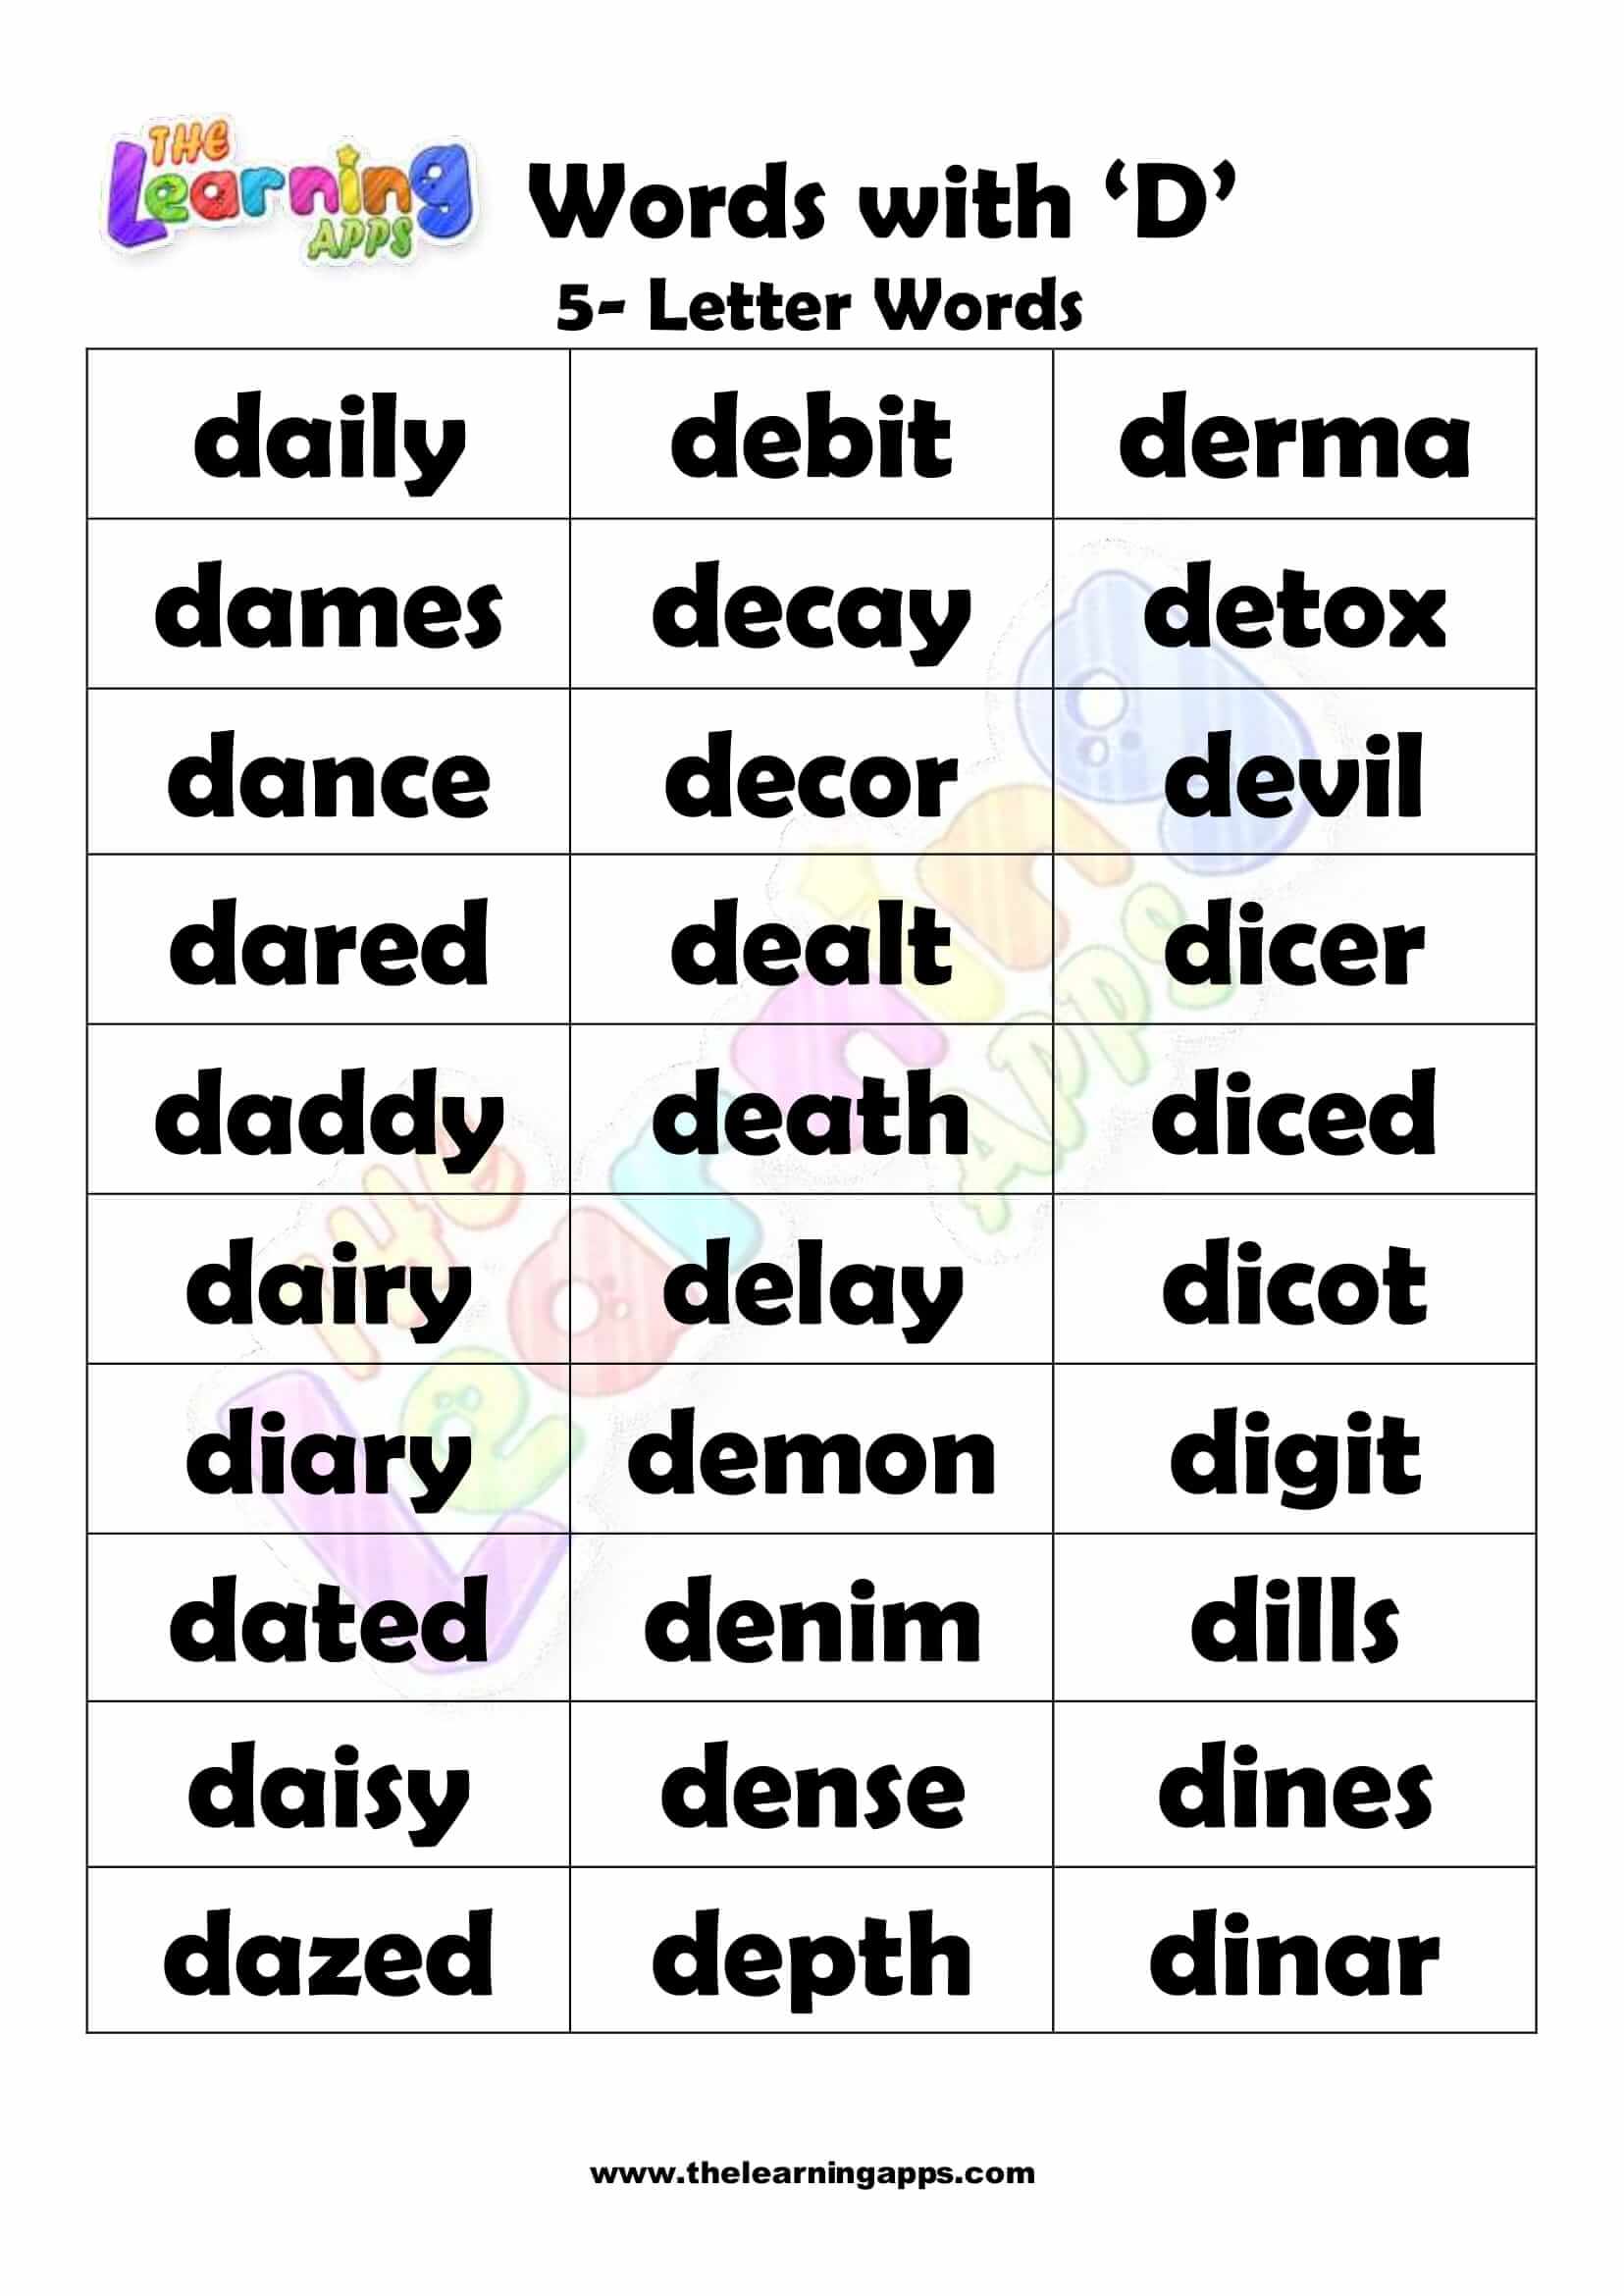 5 letter words starting with de